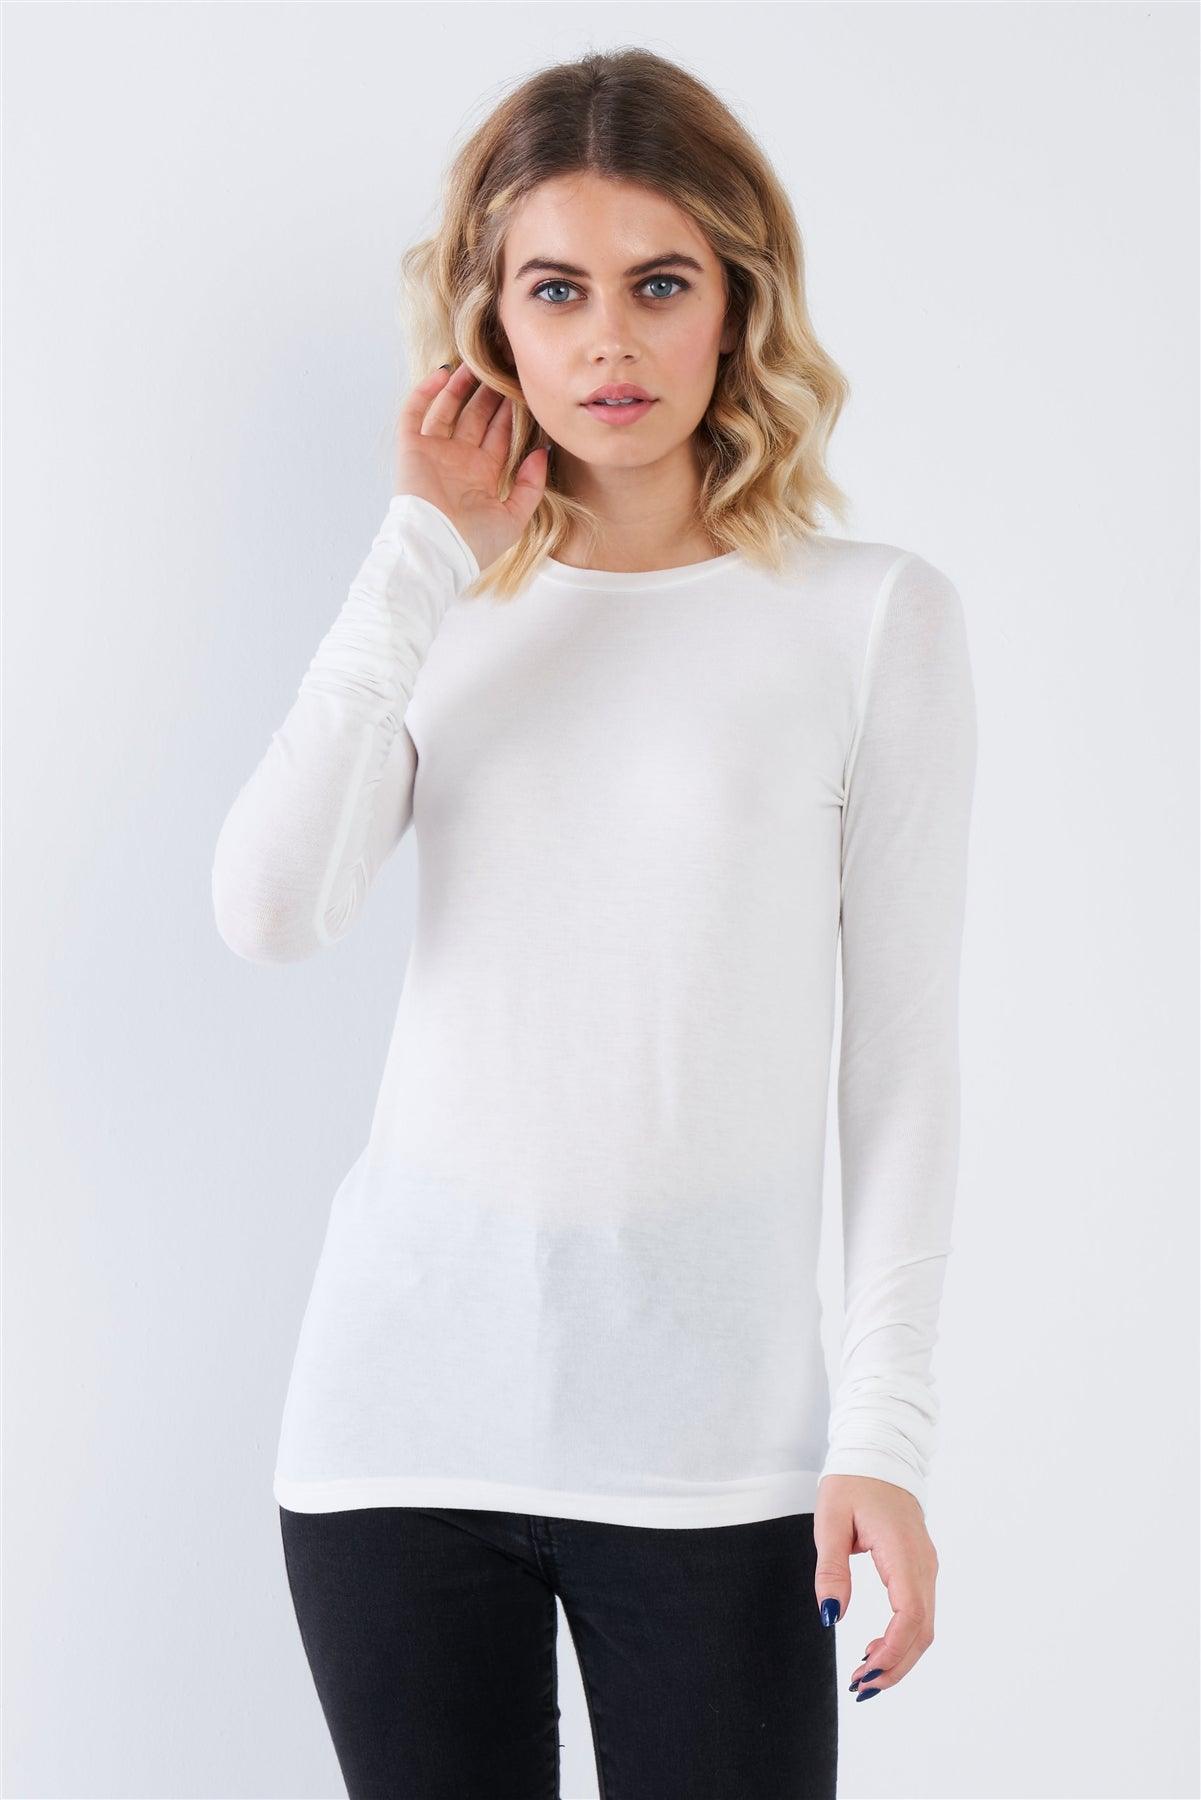 Off-White Casual Basic Long Sleeve Stretchy Bodycon Top  /3-2-1